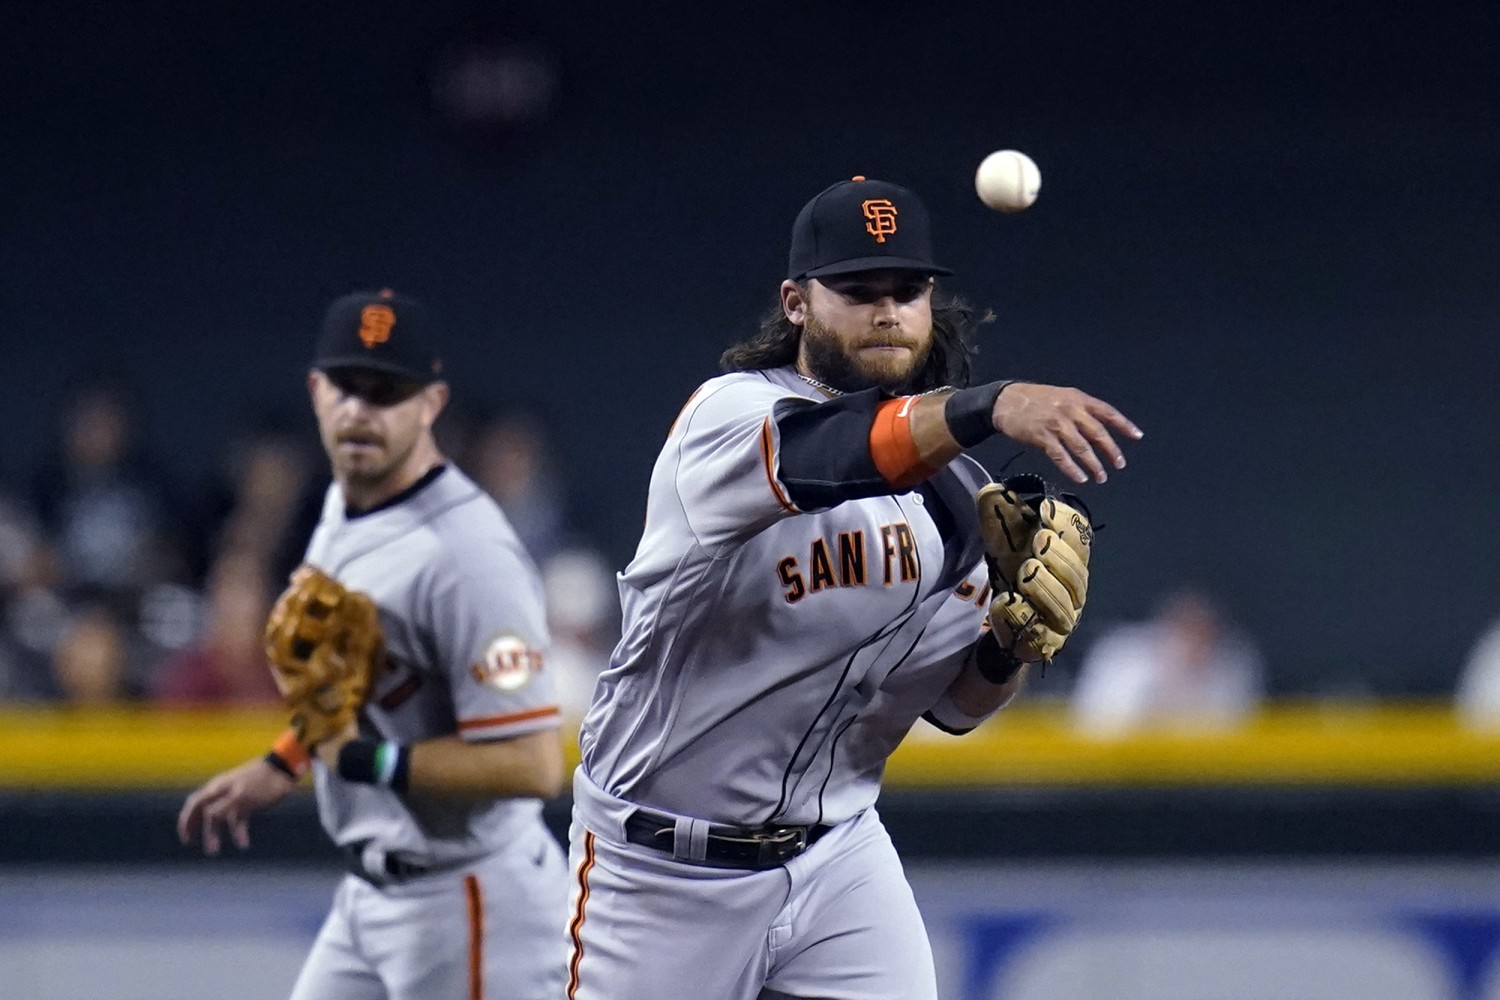 San Francisco Giants expect full participation for Pride Night